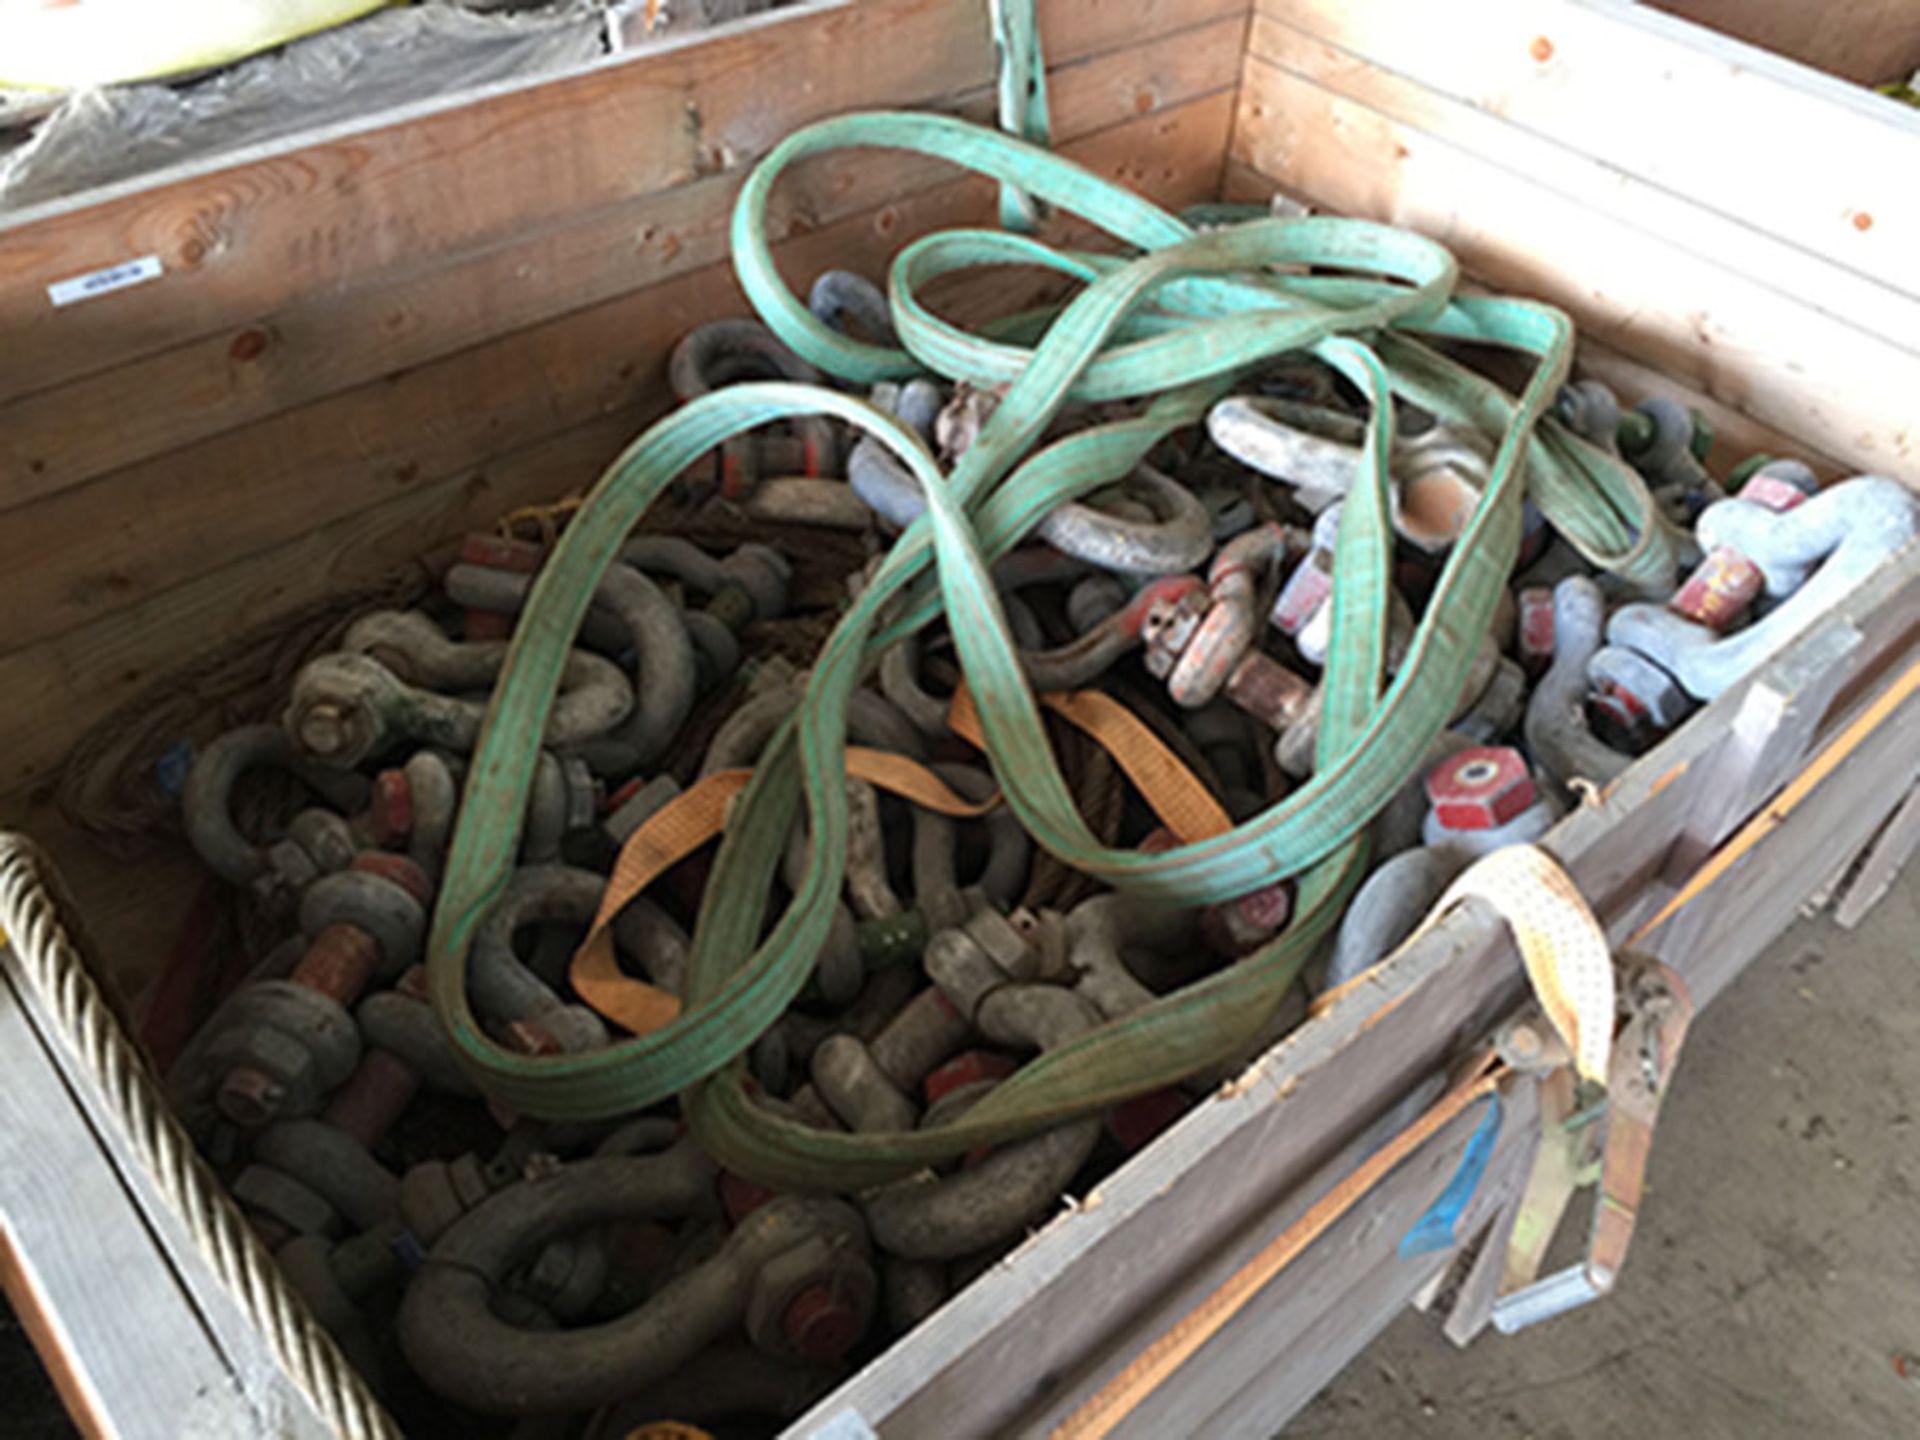 APPROXIMATELY (50) SKIDS/PALLETS/BOXES/CRATES/JOB BOXES OF ASSORTED RIGGING INCLUDING: 100'S OF - Image 14 of 36